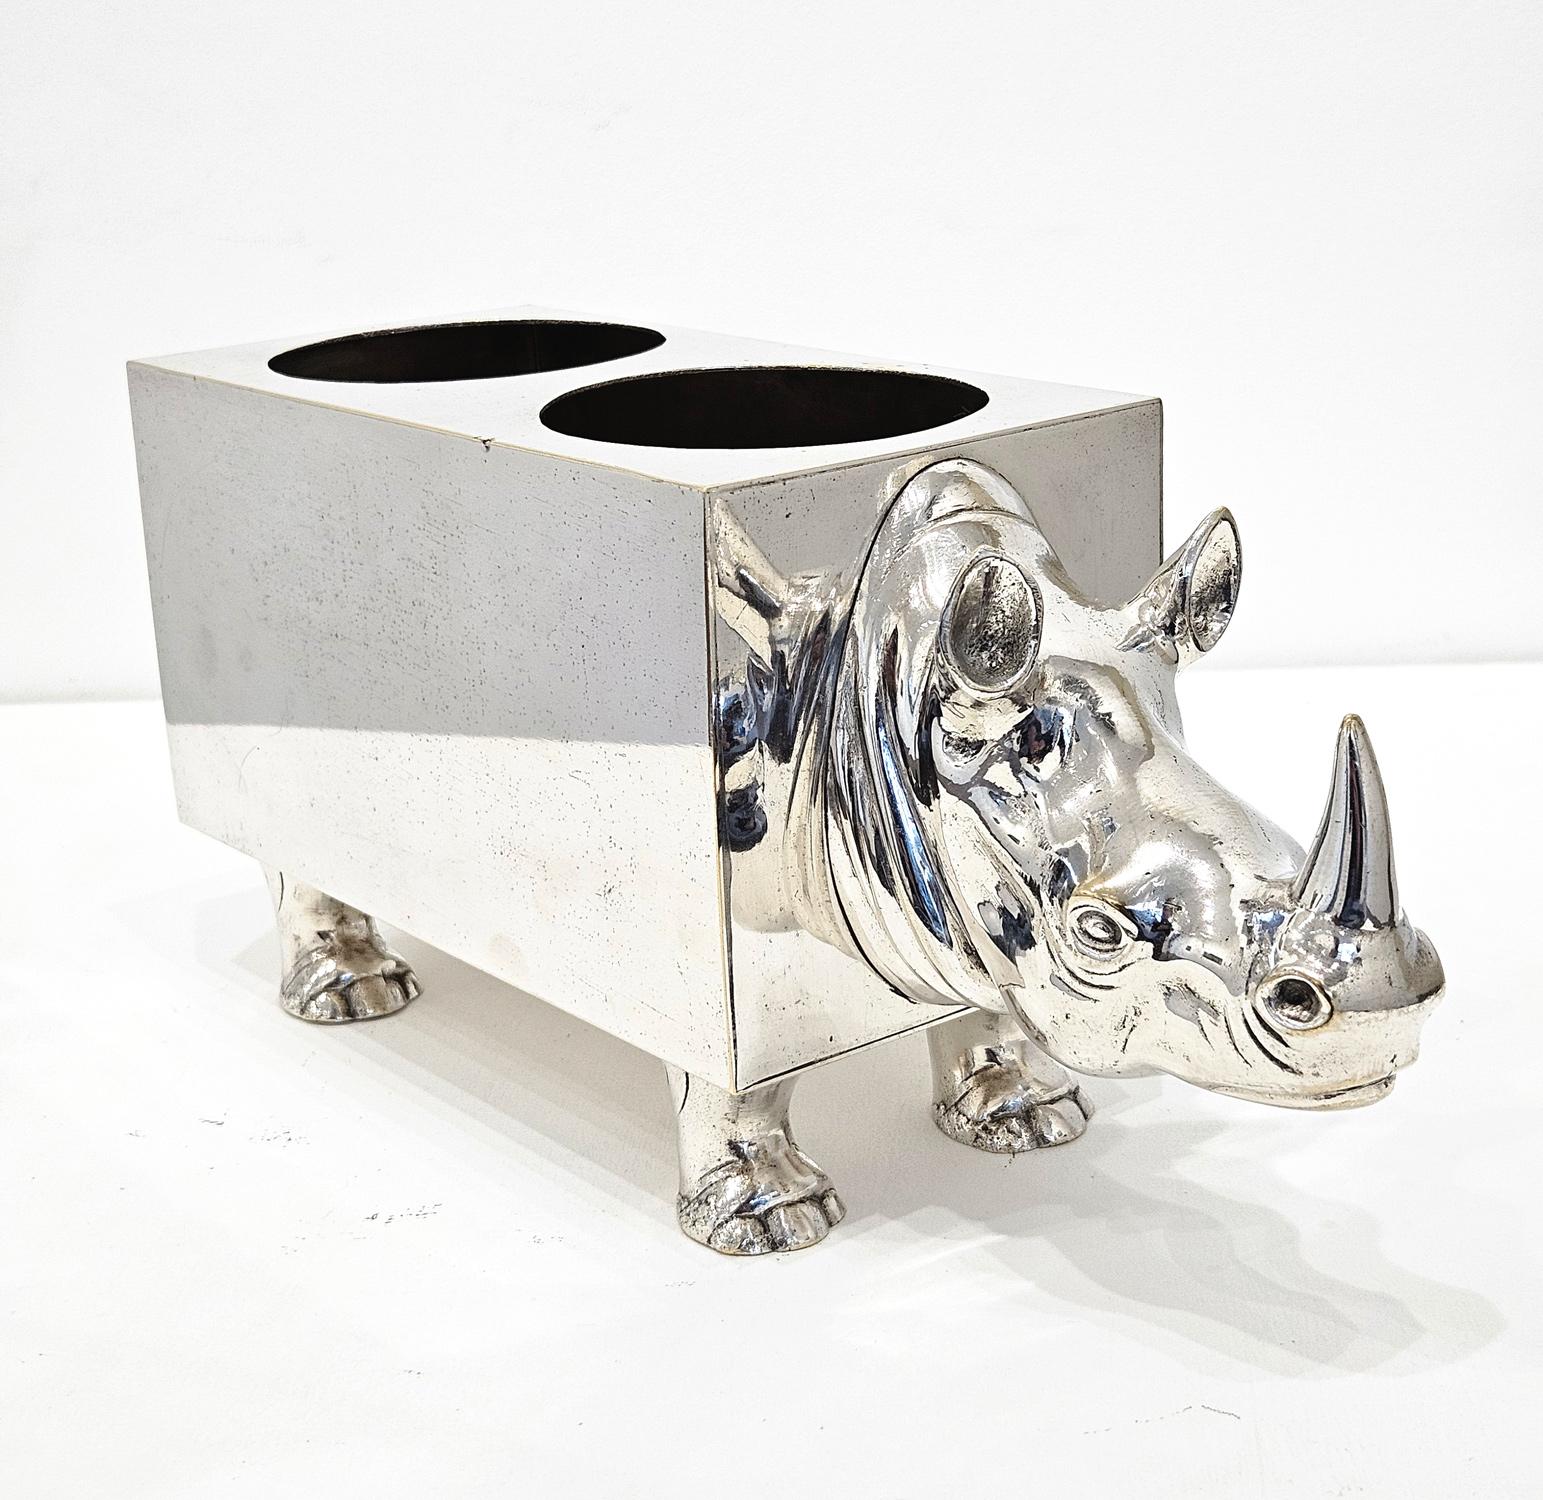 A mid 20th century silver plate double wine bottle holder in the shape of a rhinoceros, made in Spain c. 1960s. 

It is a most charming object, with the rhinoceros head, feet, and tail beautifully executed. The central body is rectangular in shape